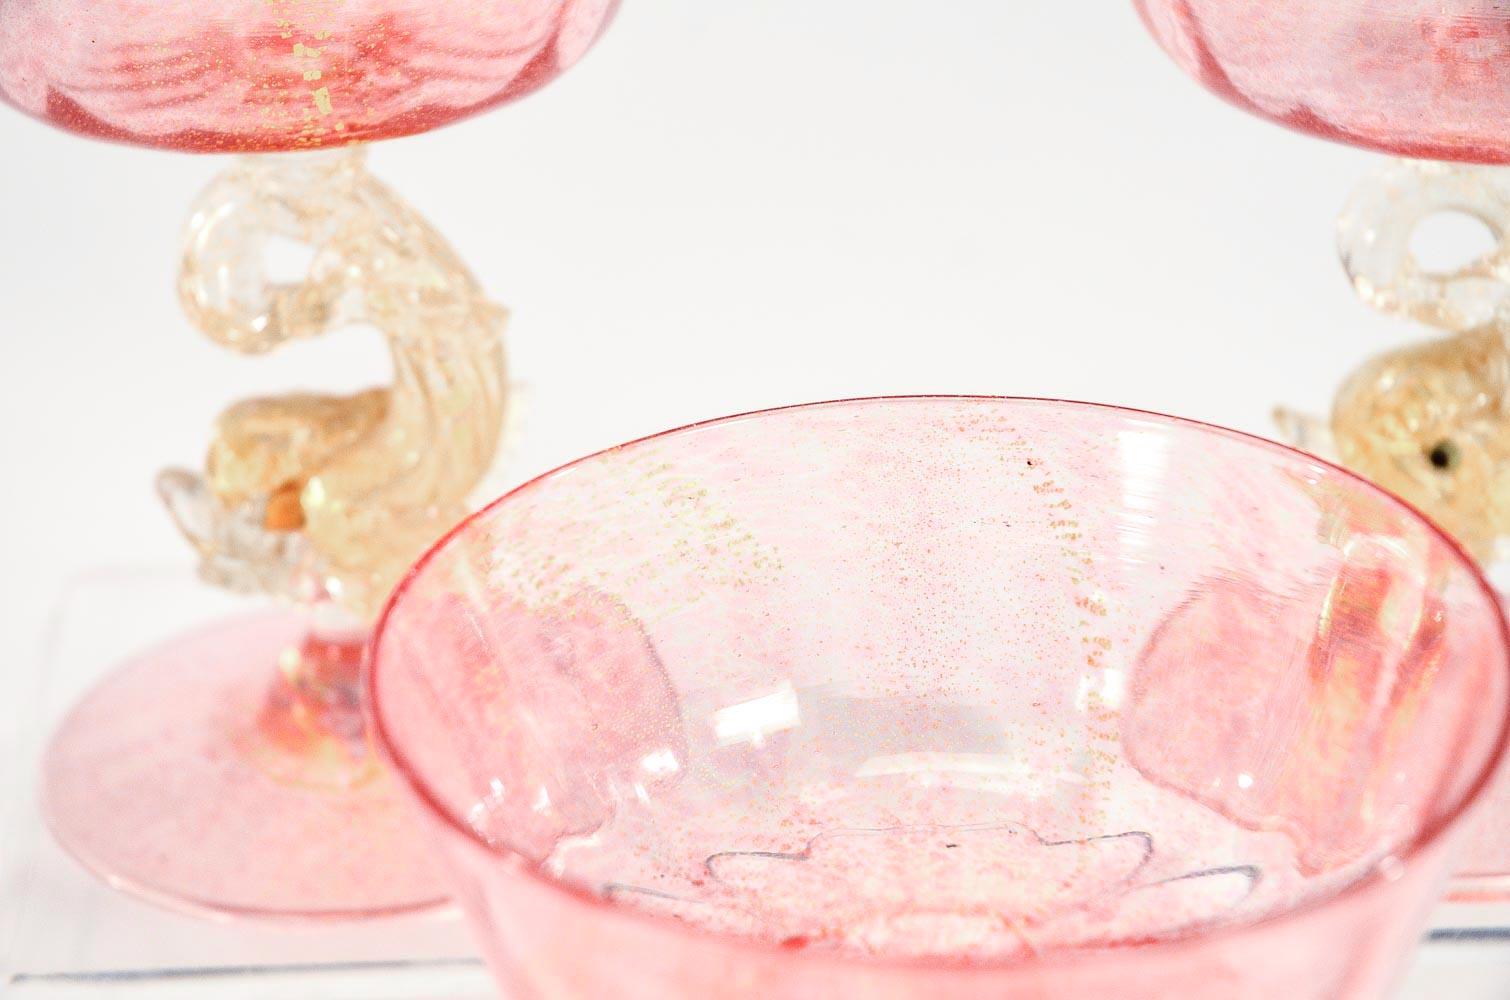 pink champagne coupe glasses